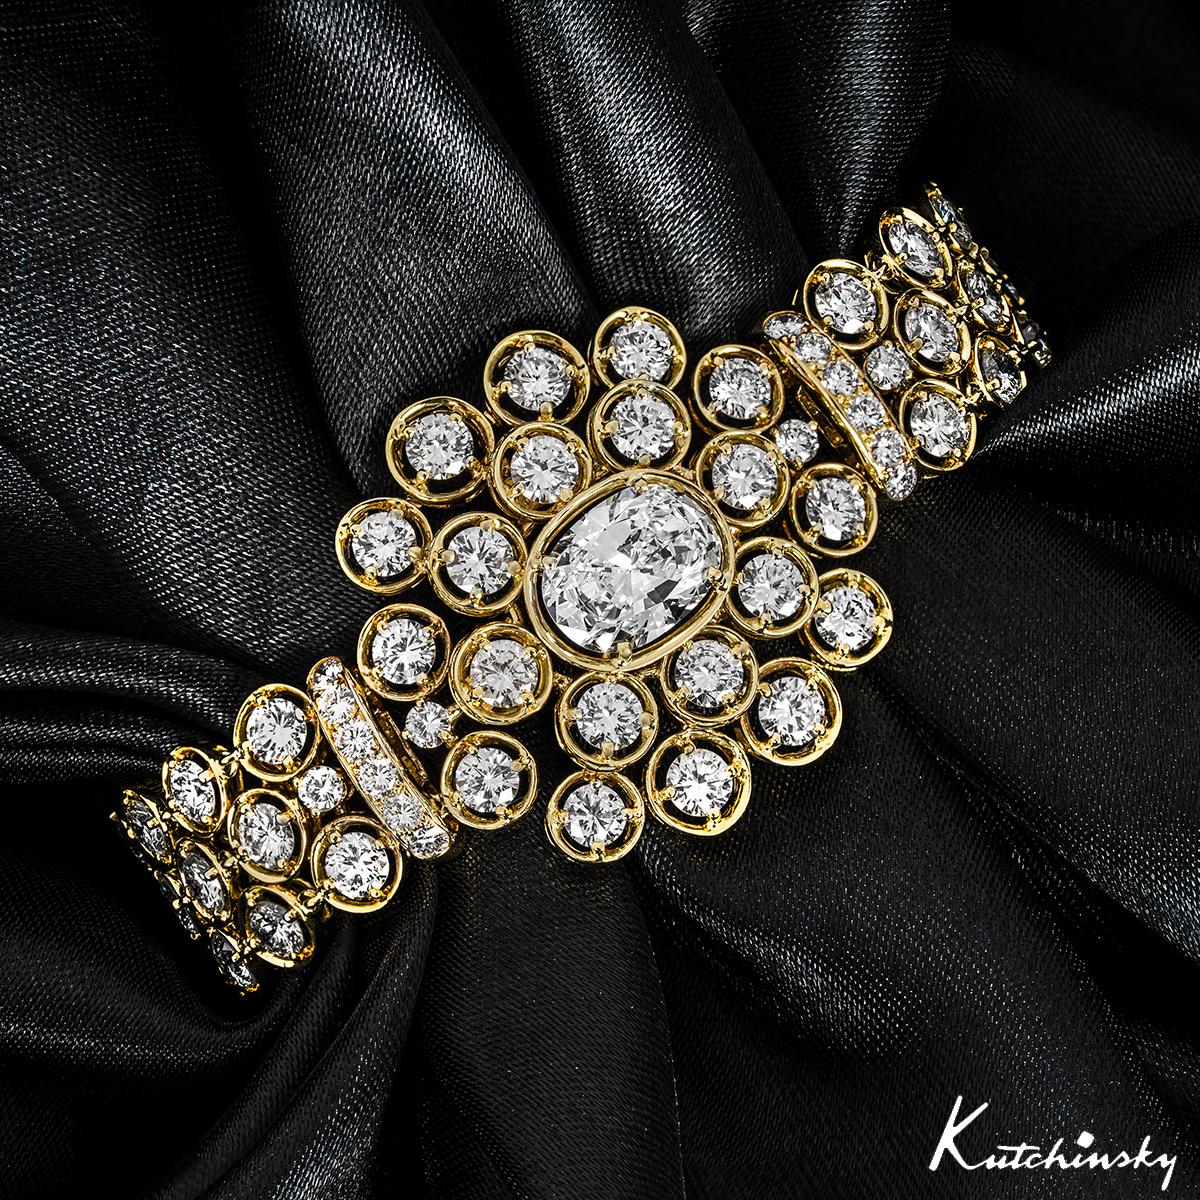 An extraordinary 18k yellow gold diamond Kutchinsky bracelet. The centre of the bracelet is adorned with an oval cut diamond weighing 2.72ct, E colour and SI1 clarity. Radiating from the centre are 89 round brilliant cut diamonds set throughout with